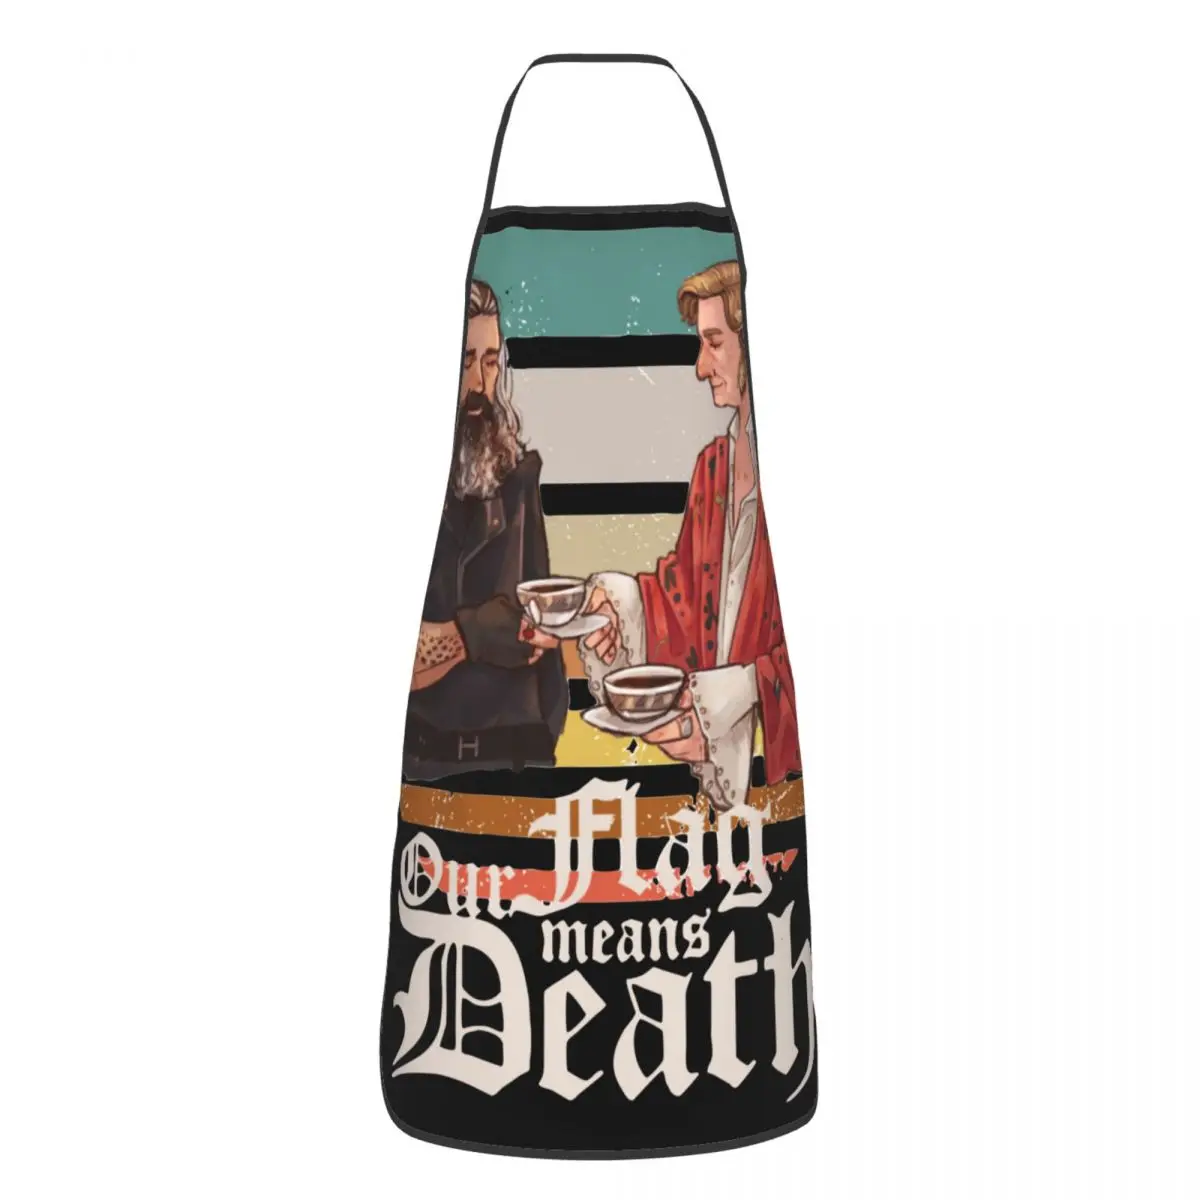 

Stede Blackbeard On Retro Sunset Kitchen Baking Apron Sleeveless Our Flag Means Death for Chef Barista Cooking Home Cleaning